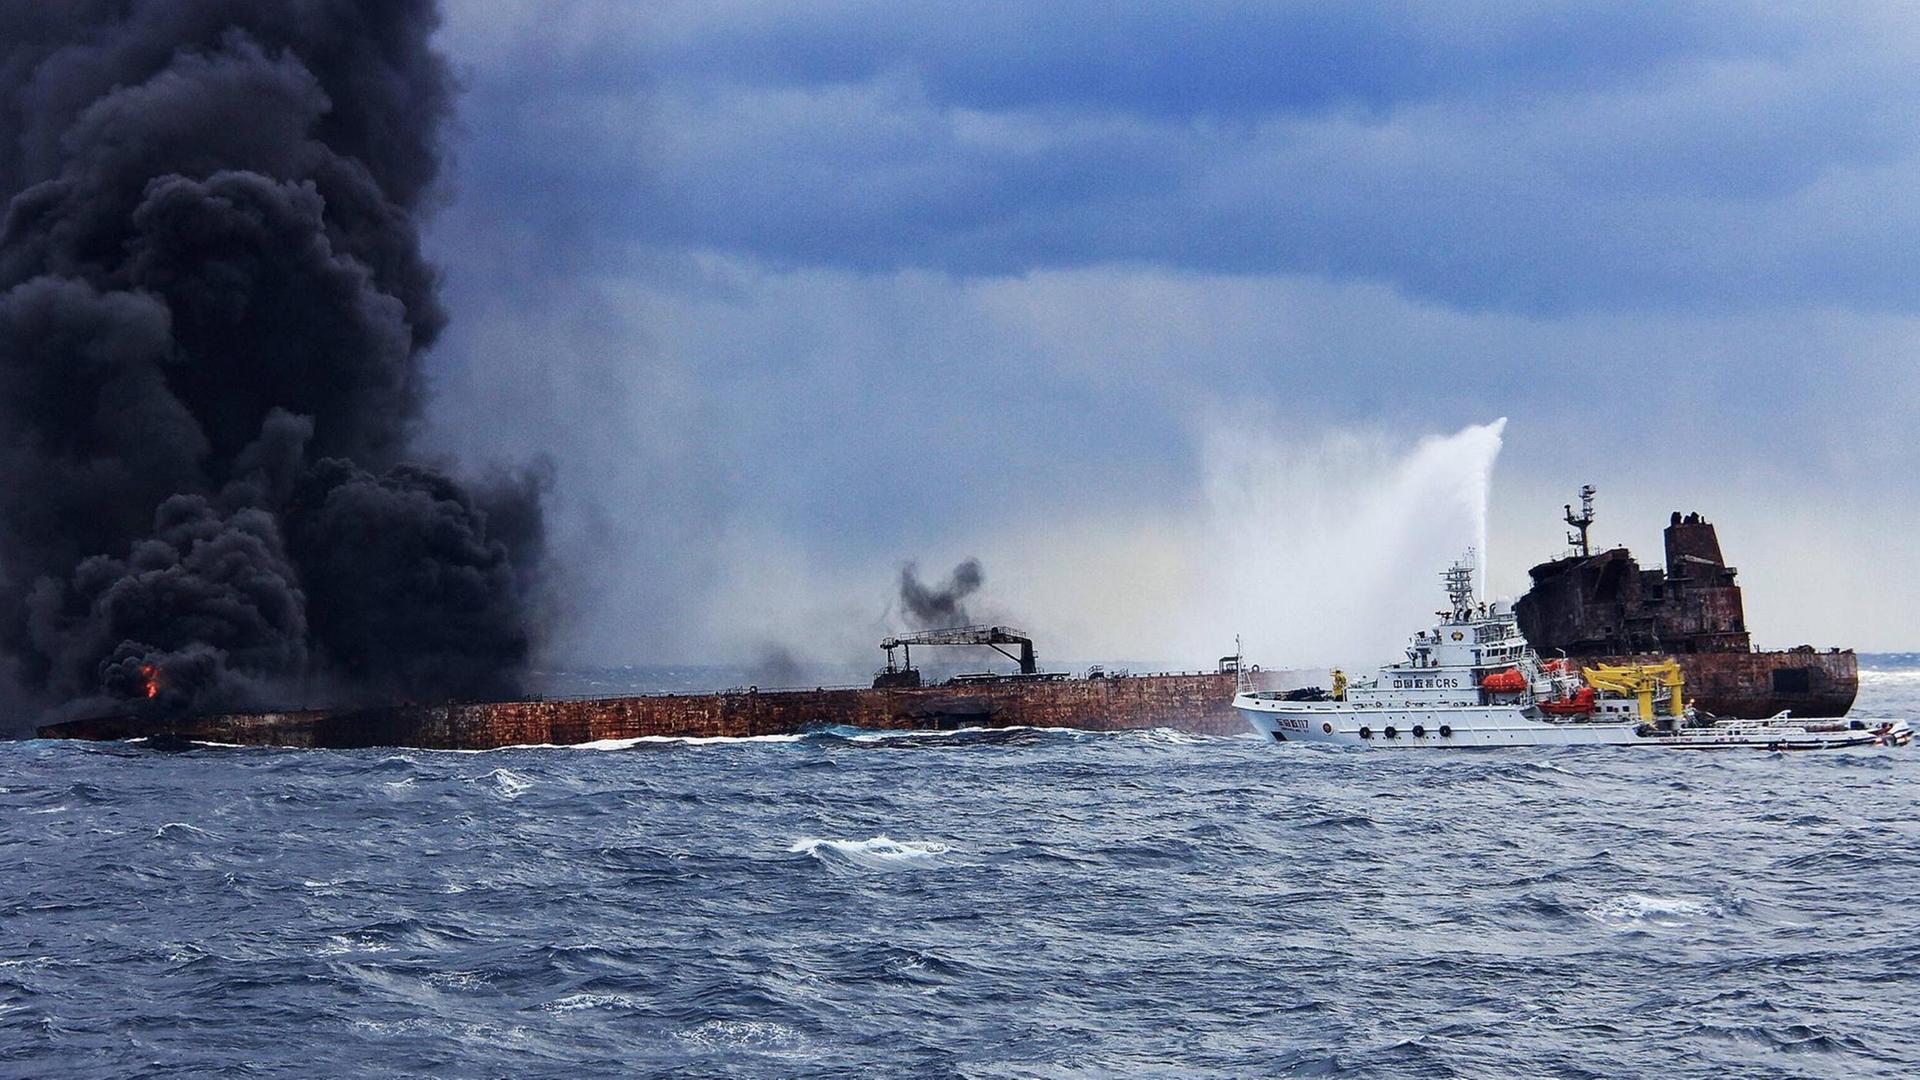 Rescuers spray foam to extinguish flames on the stricken oil tanker SANCHI off the coast of east China s Shanghai, Jan. 12, 2018.